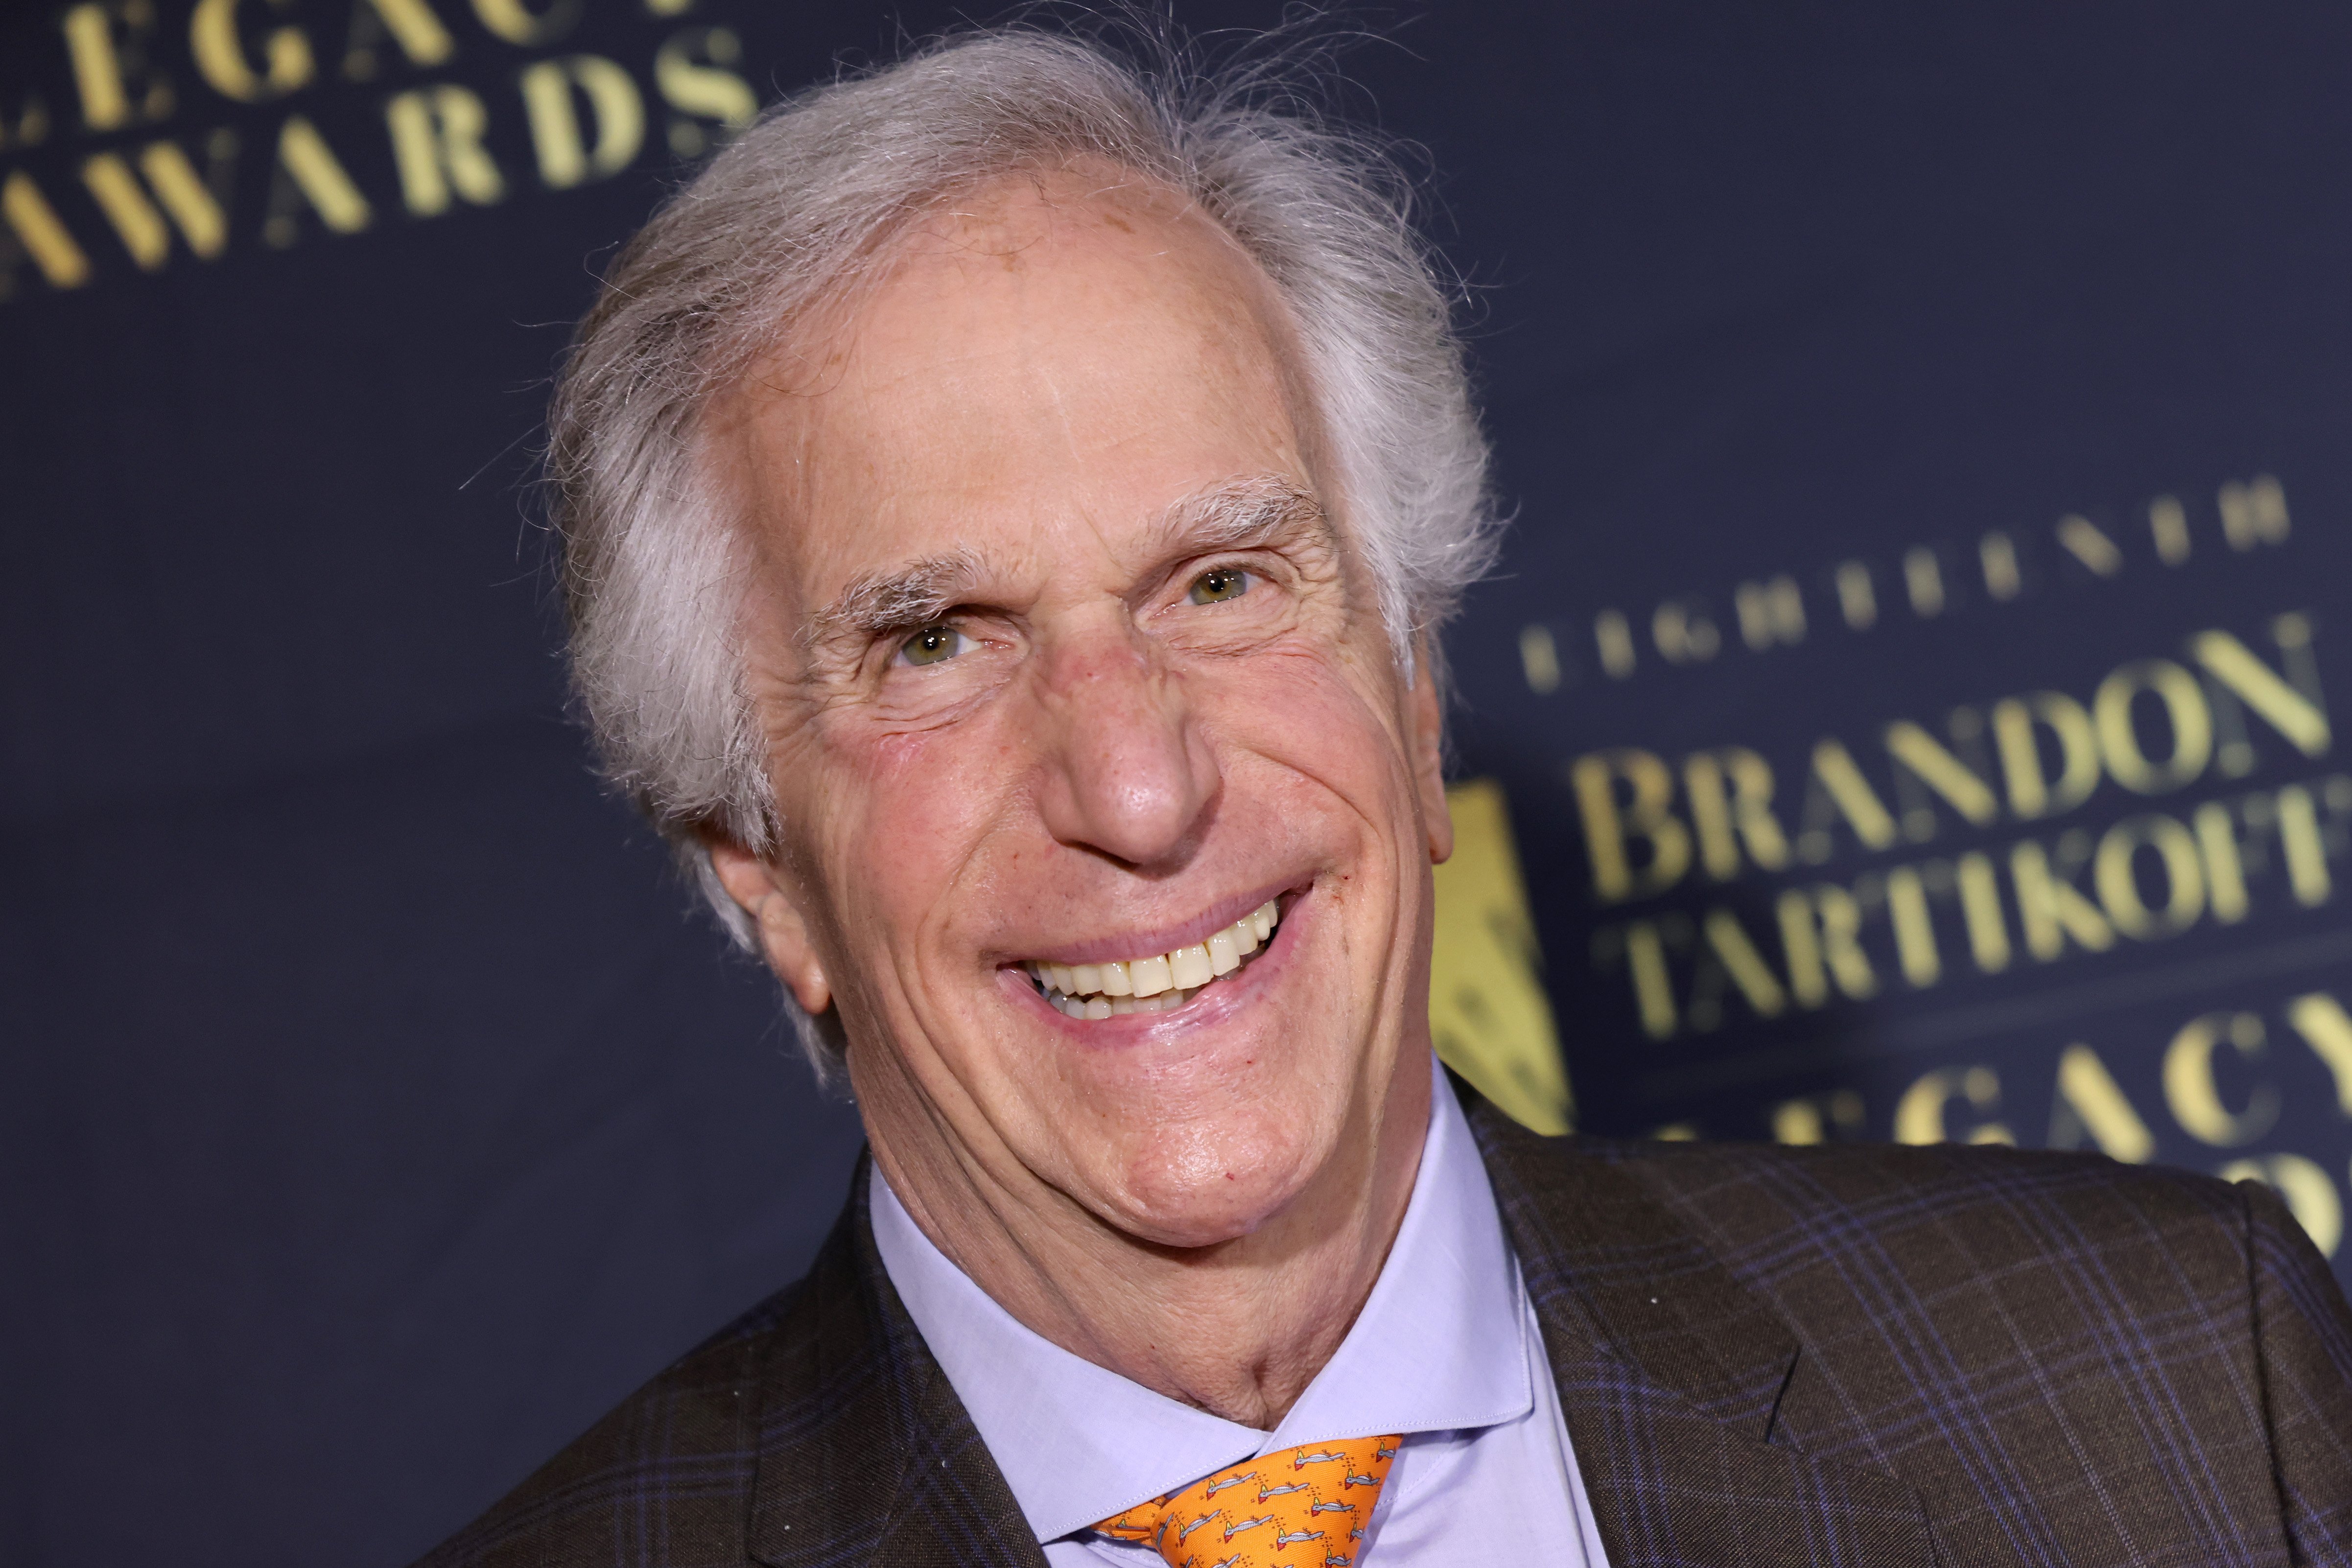 Henry Winkler attending the 18th Annual Brandon Tartikoff Legacy Awards at Beverly Wilshire, A Four Seasons Hotel on June 02, 2022 in Beverly Hills, California. | Source: Getty Images